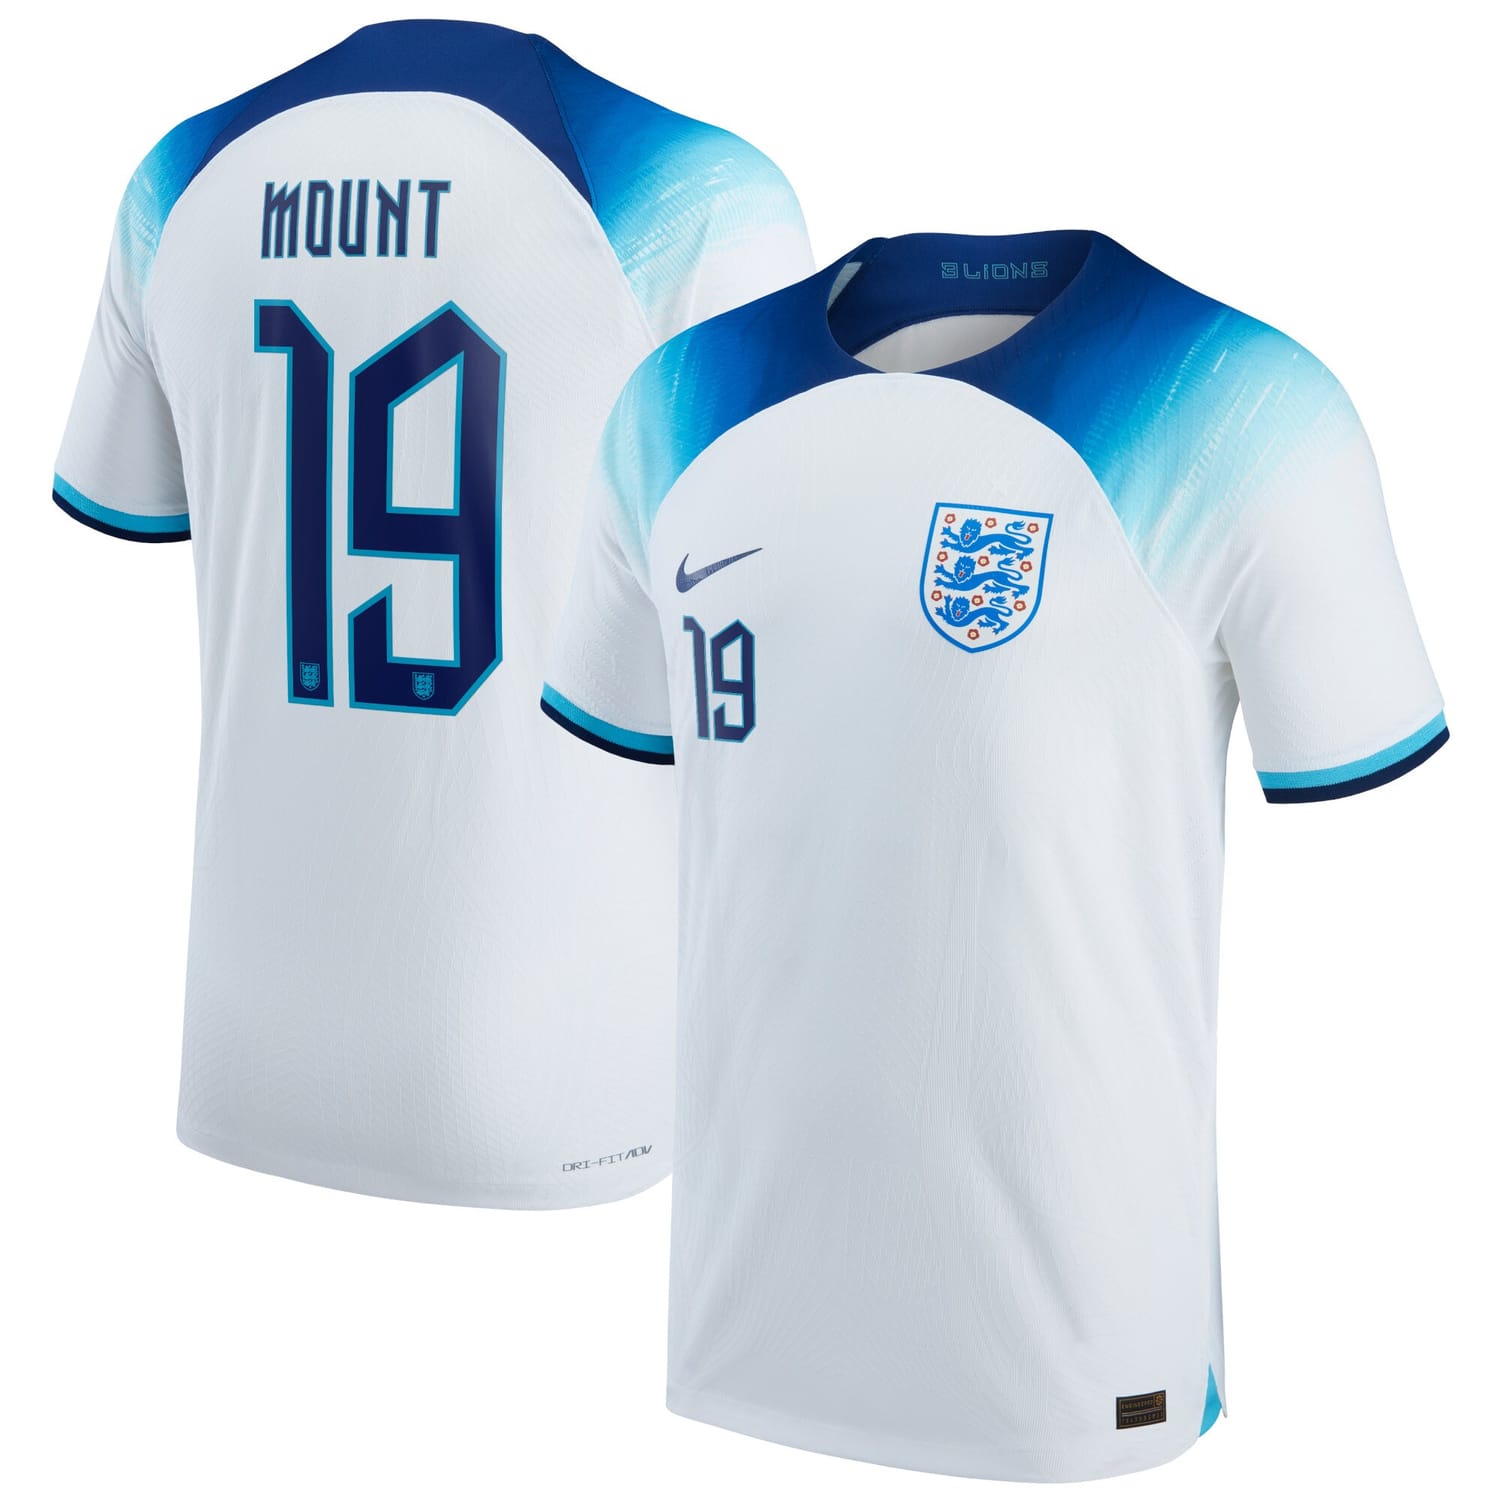 England National Team Home Authentic Jersey Shirt 2022 player Mason Mount 19 printing for Men